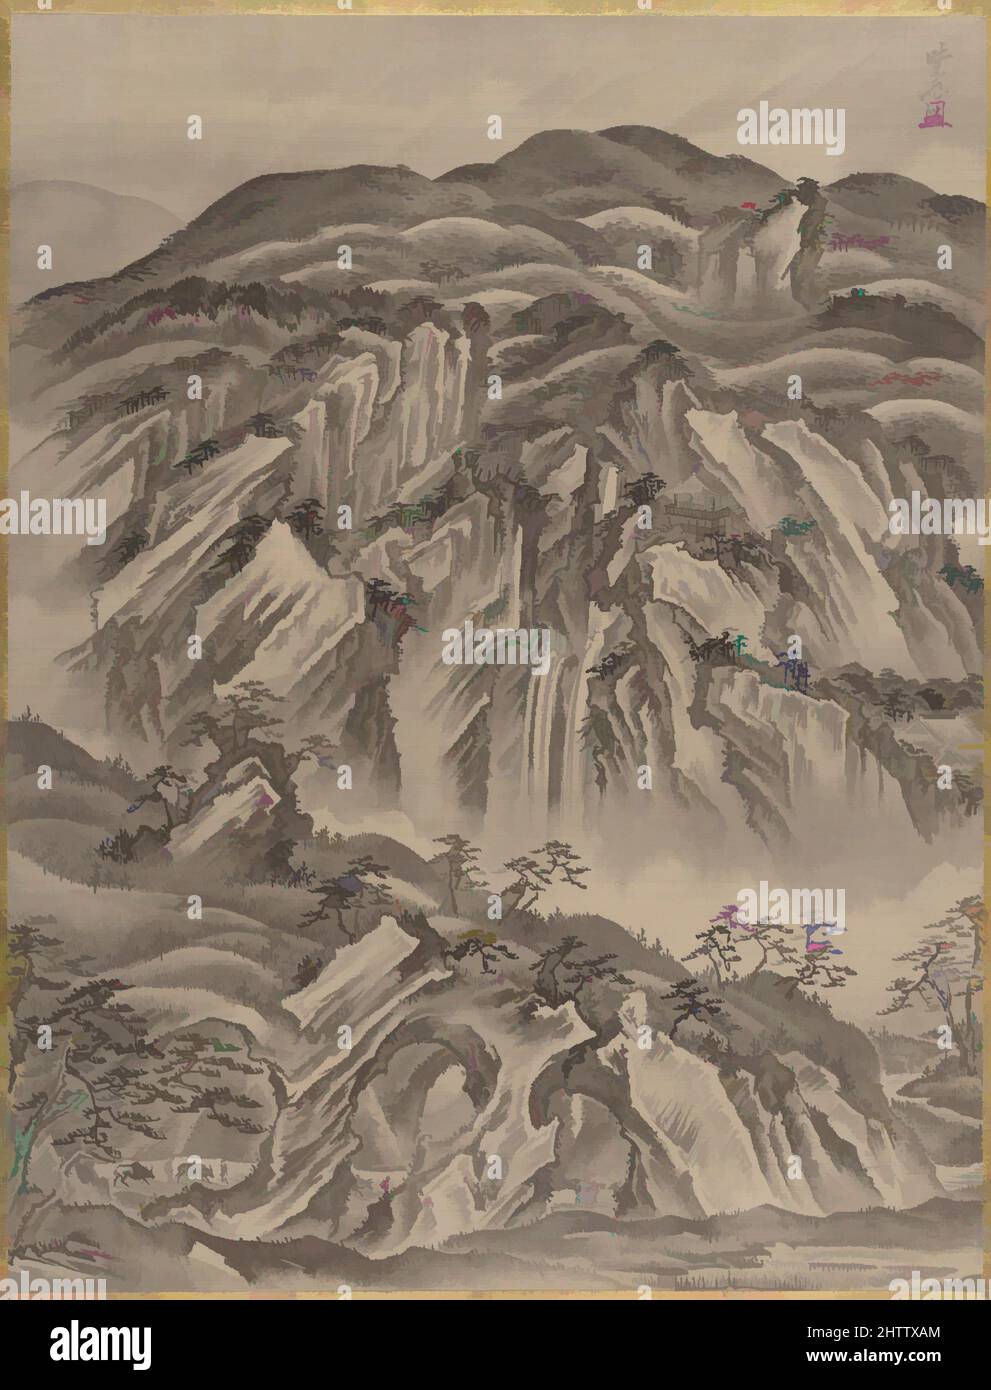 Art inspired by Rocky Landscape, Meiji period (1868–1912), ca. 1887, Japan, Album leaf; ink and color on silk, 14 1/4 x 10 7/8 in. (36.2 x 27.6 cm), Paintings, Kawanabe Kyōsai (Japanese, 1831–1889, Classic works modernized by Artotop with a splash of modernity. Shapes, color and value, eye-catching visual impact on art. Emotions through freedom of artworks in a contemporary way. A timeless message pursuing a wildly creative new direction. Artists turning to the digital medium and creating the Artotop NFT Stock Photo